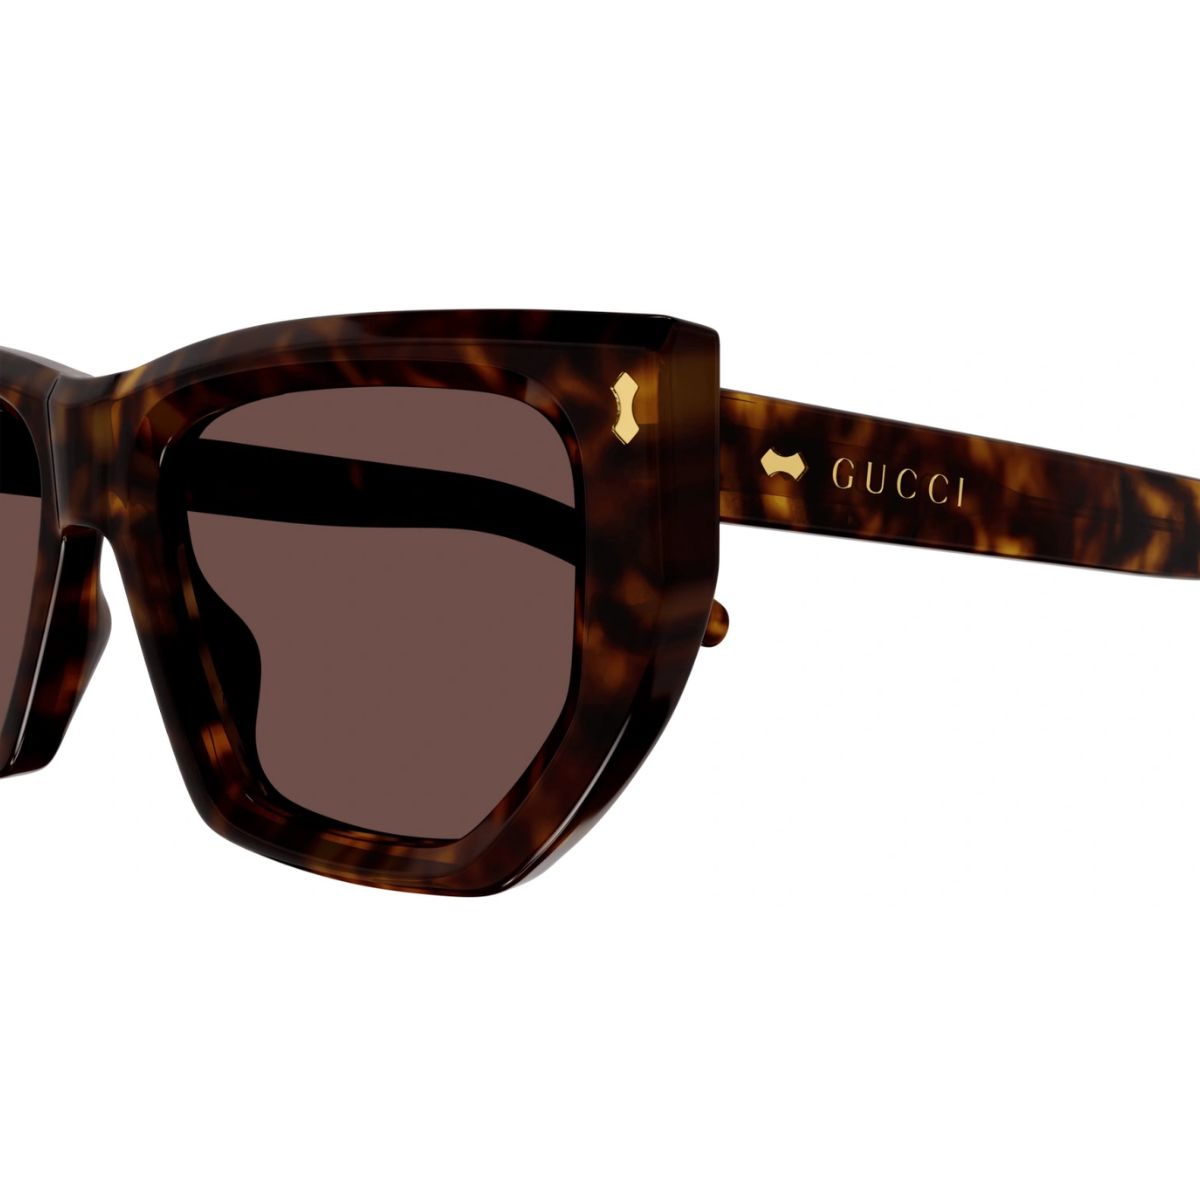 "Gucci Spectacles GG1502S 002: Iconic Style"